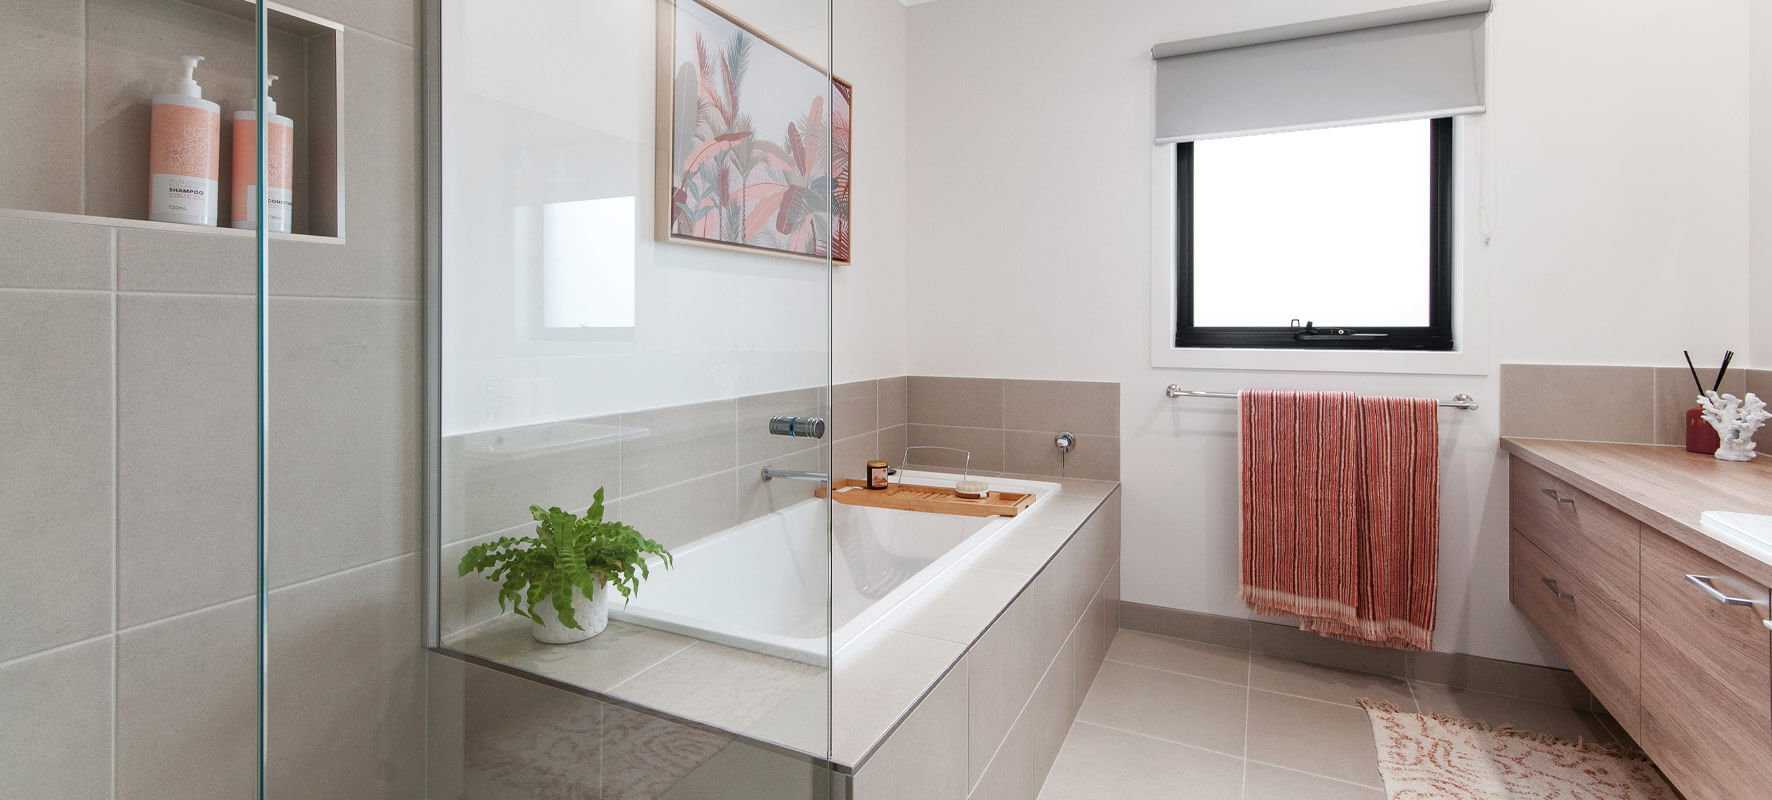 Photo of modern family bathroom with grey tiles, white bathub set in the tiles, timber vanity and clear glass shower screen. Pink floral painting on the wall.